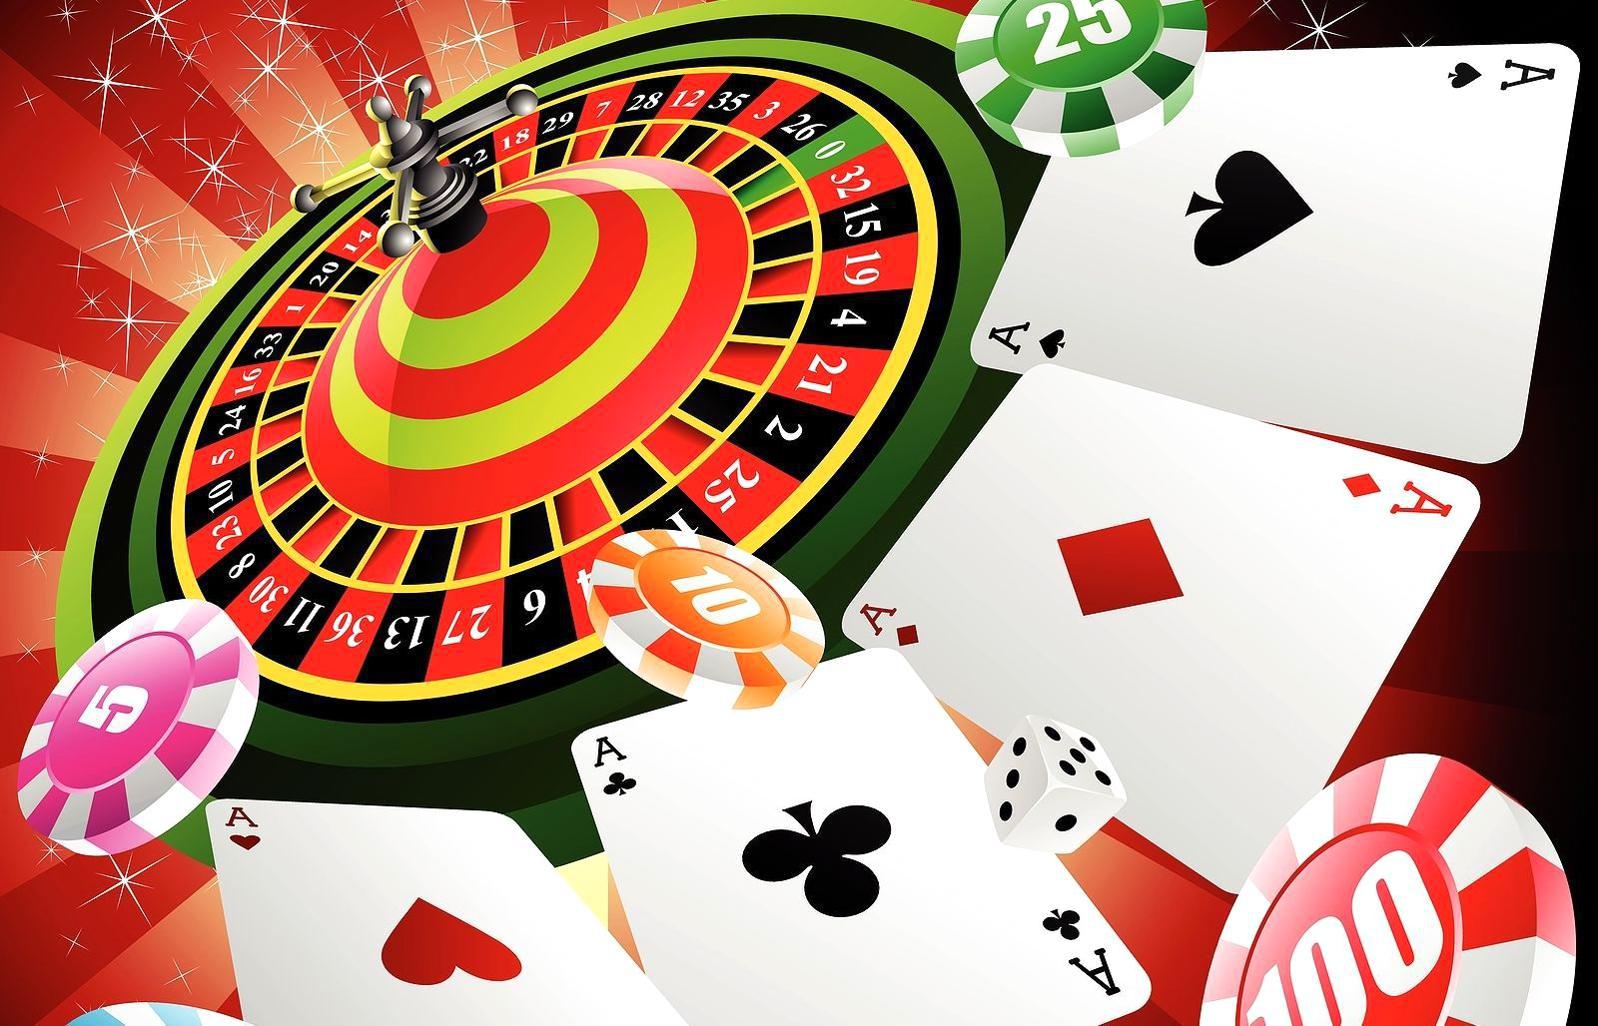 What bonuses and promotions are available at Rajbet Casino?